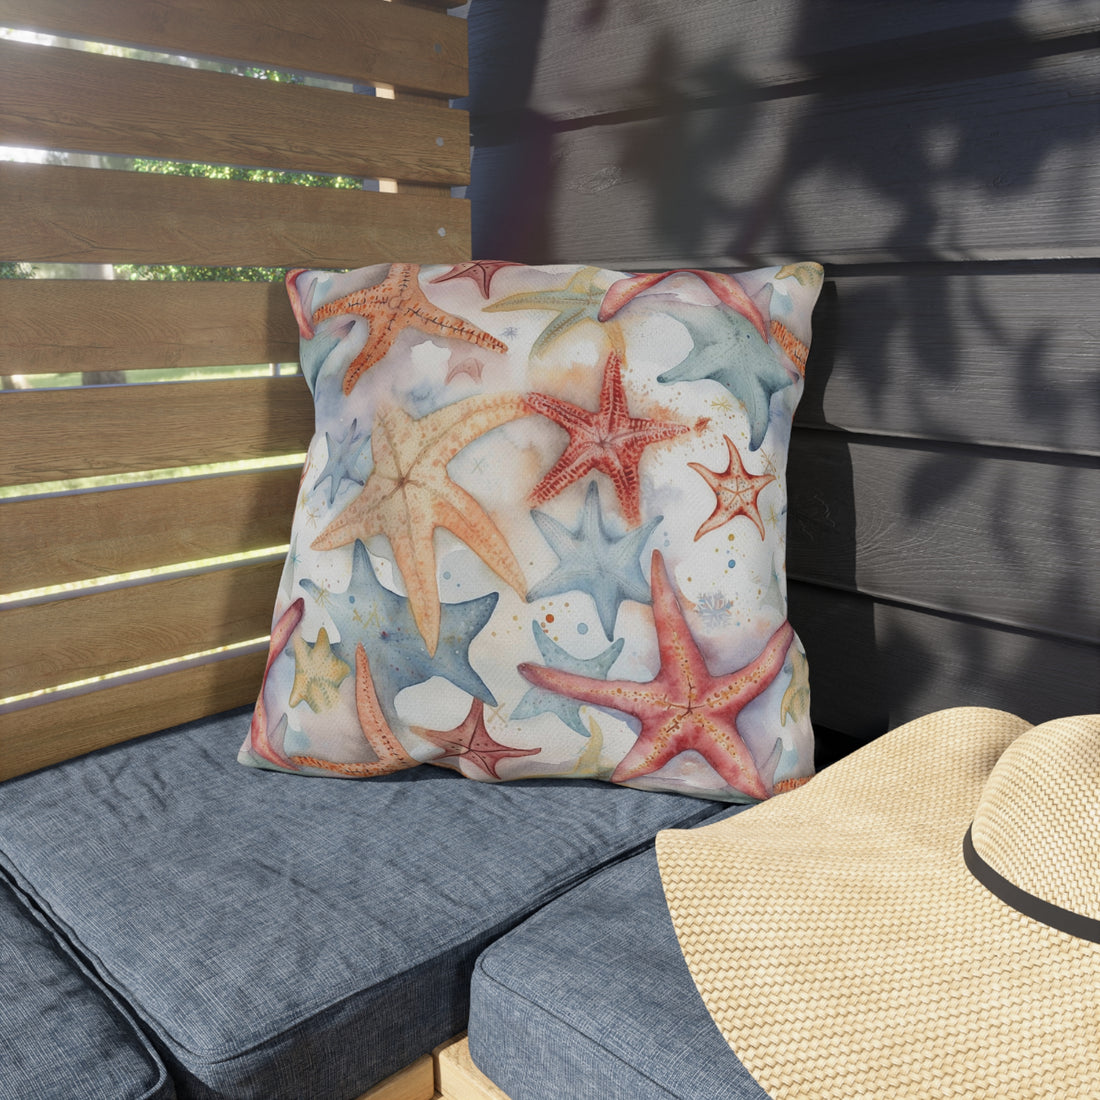 Starfish Beach Vibe Patterned Outdoor Pillows